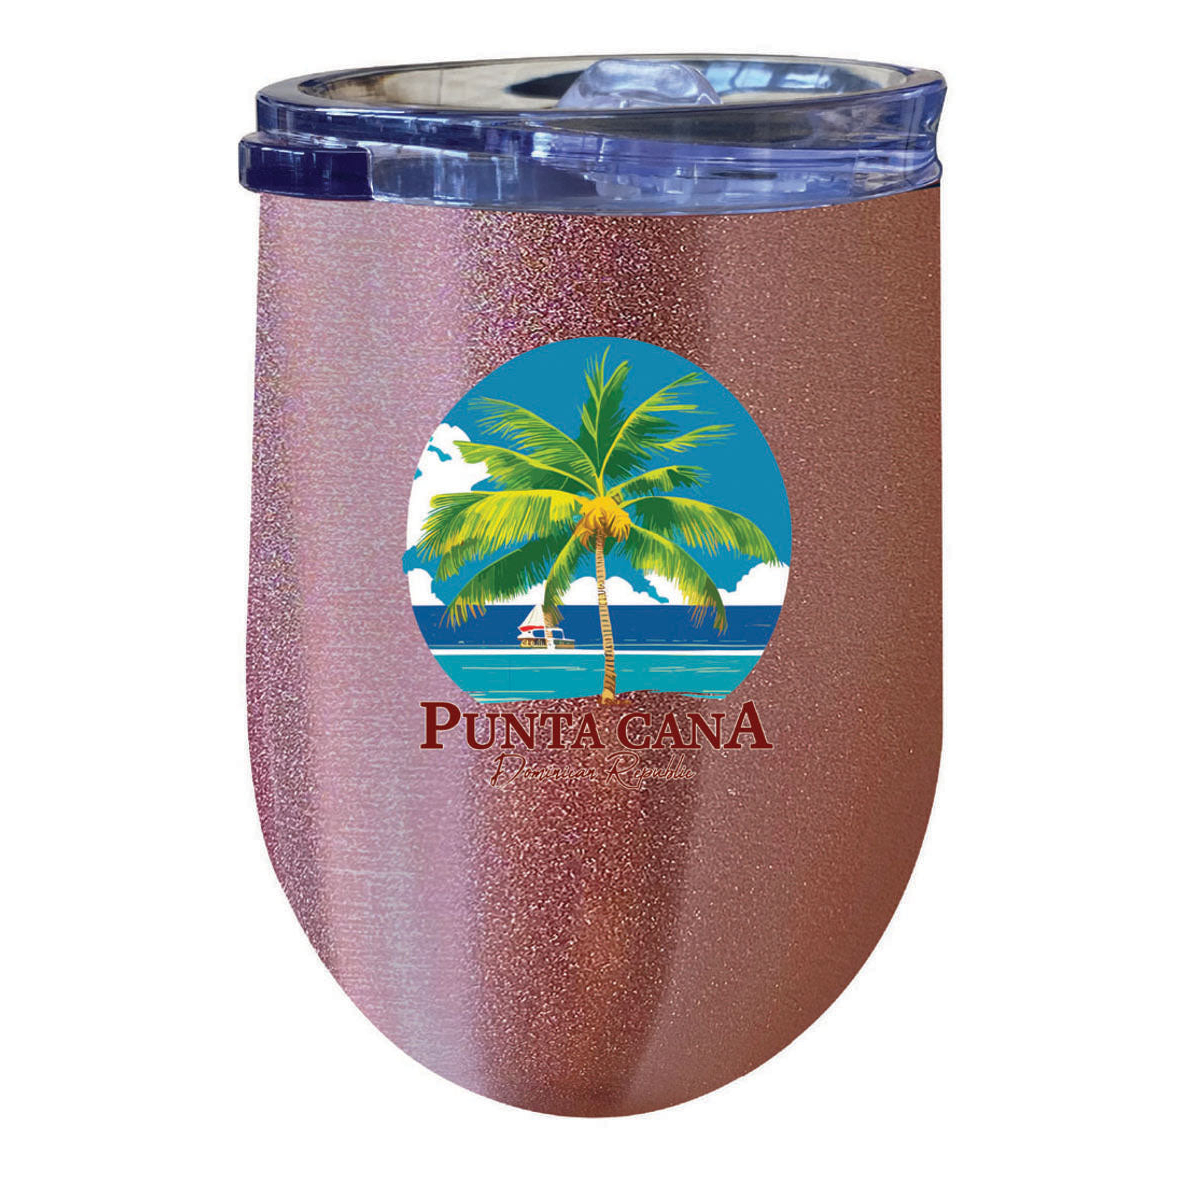 Punta Cana Dominican Republic Souvenir 12 Oz Insulated Wine Stainless Steel Tumbler - Purple, PARROT B